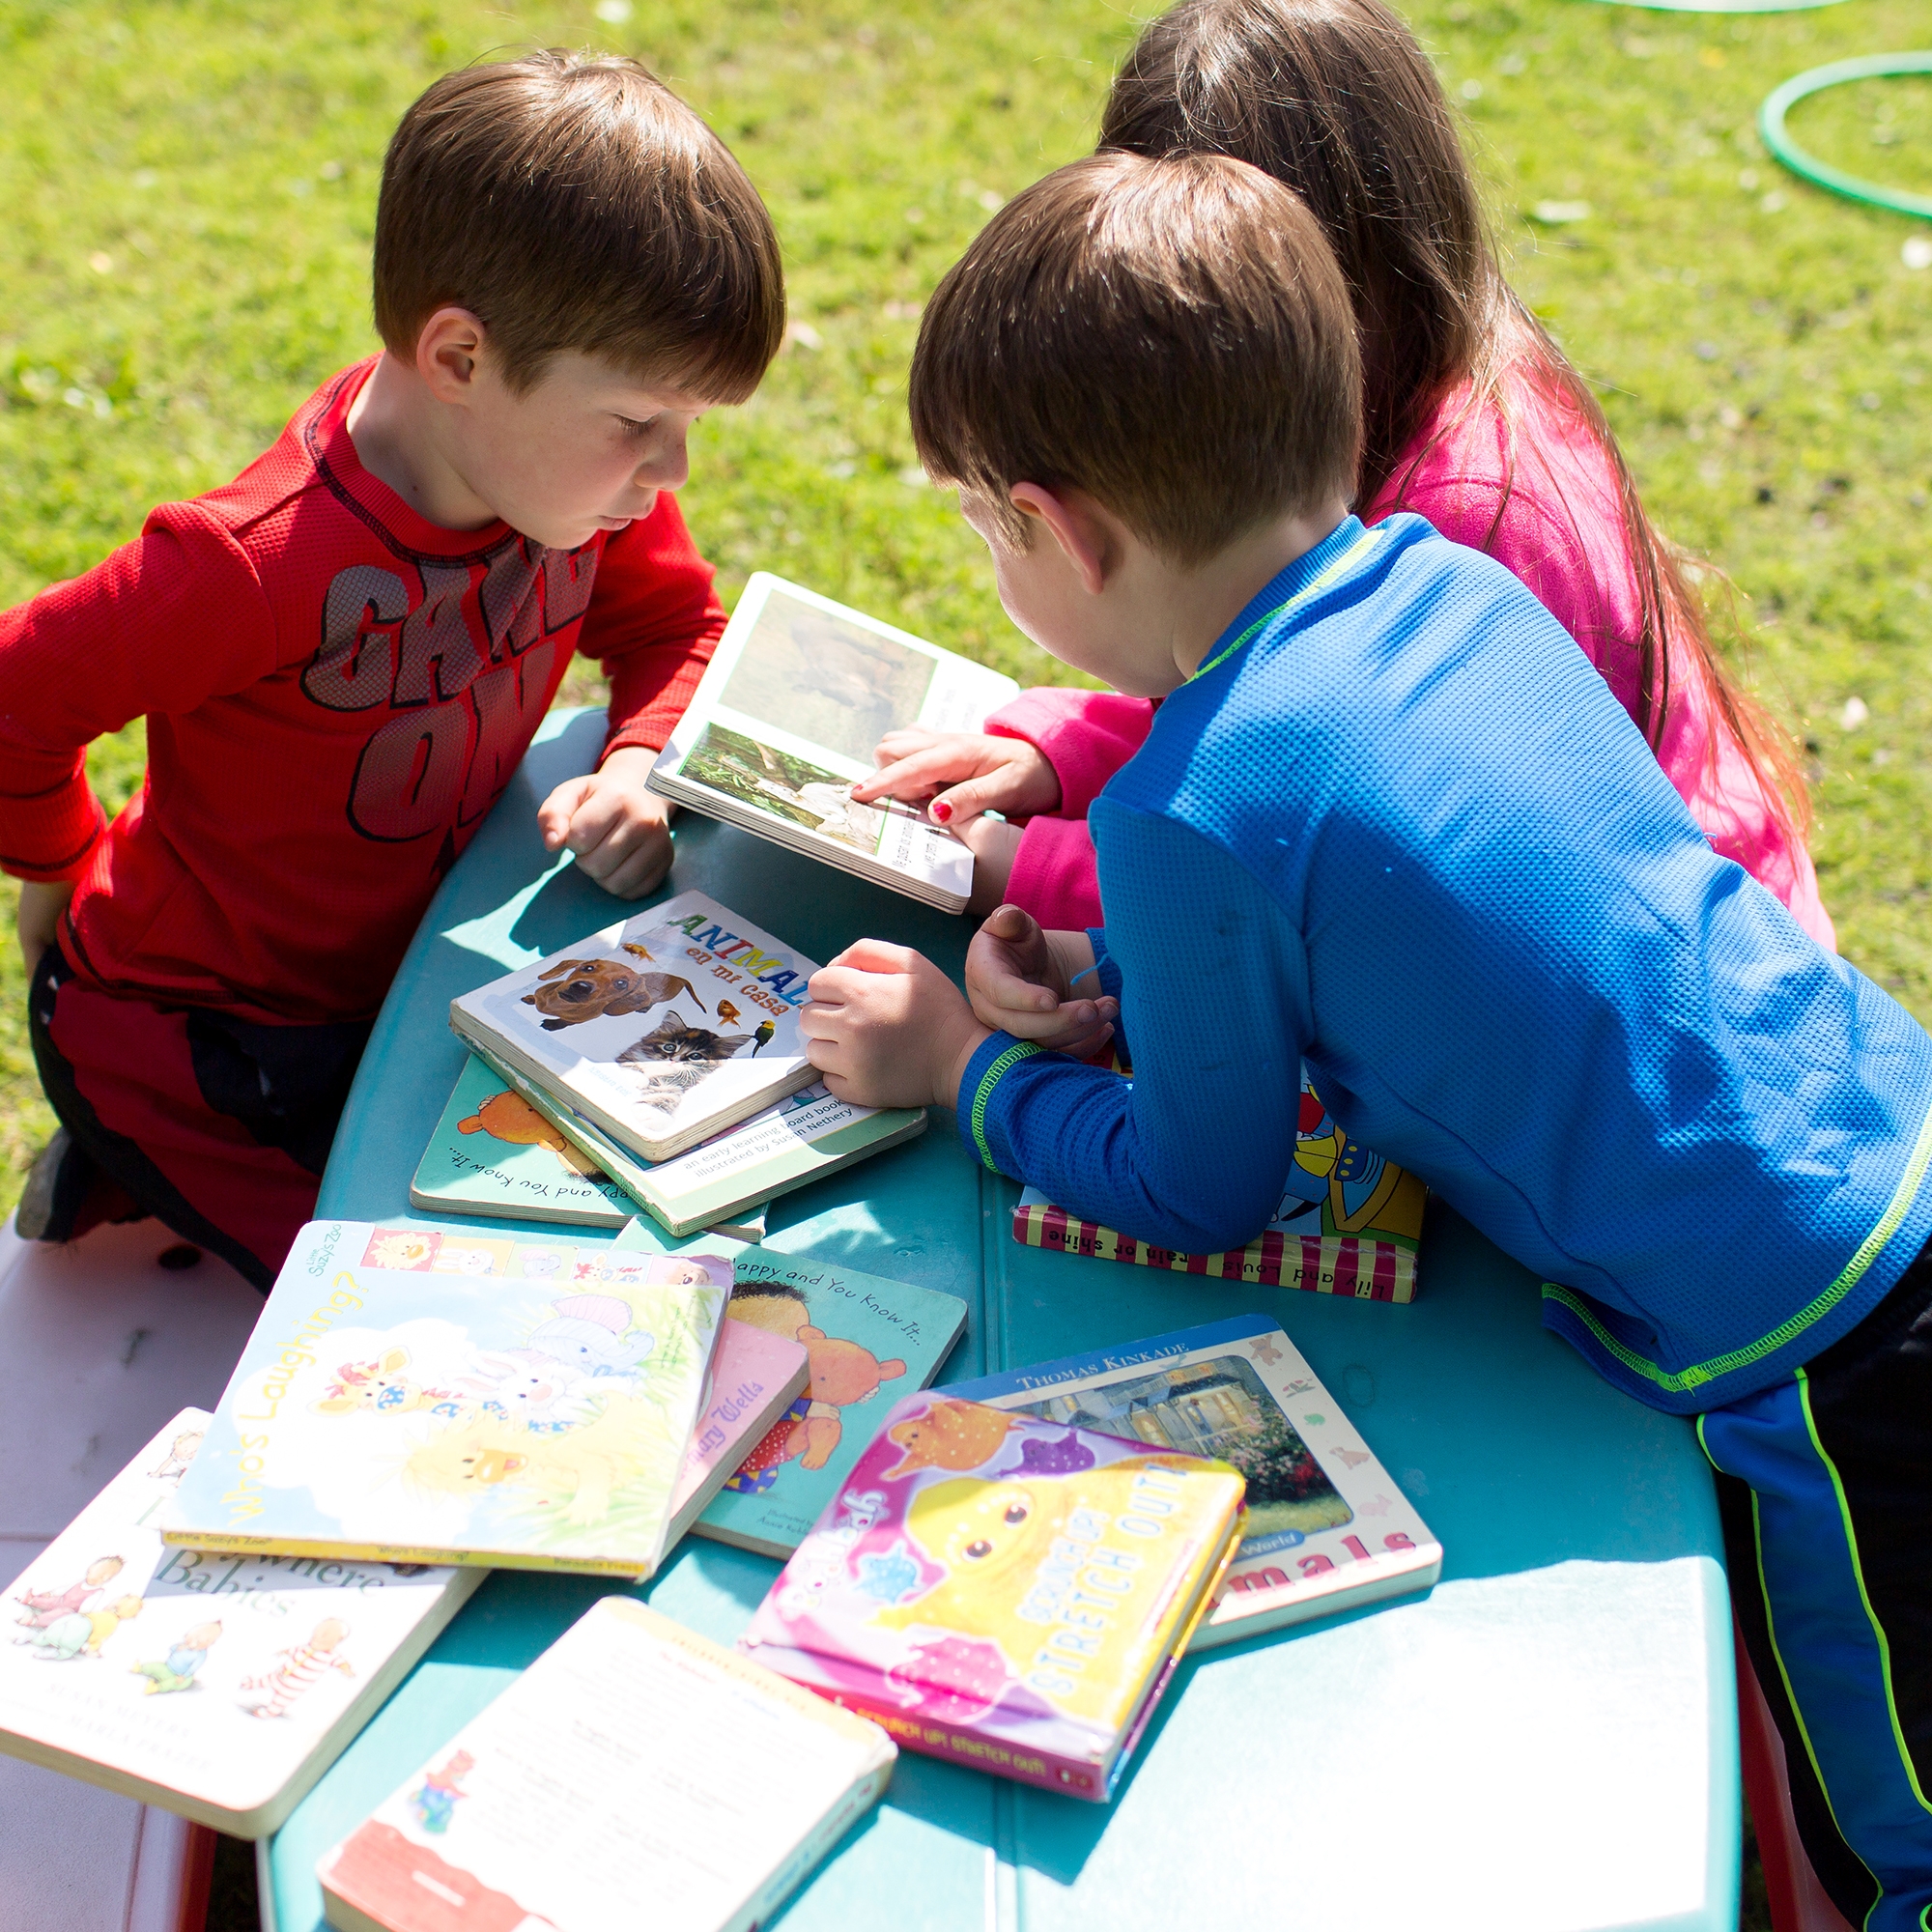 Easton, Kellen and Ada share a book on the playground at Save the Children’s Head Start center in Arkansas, on April 27, 2017. Photo credit: Eli Murray / Save the Children 2017.